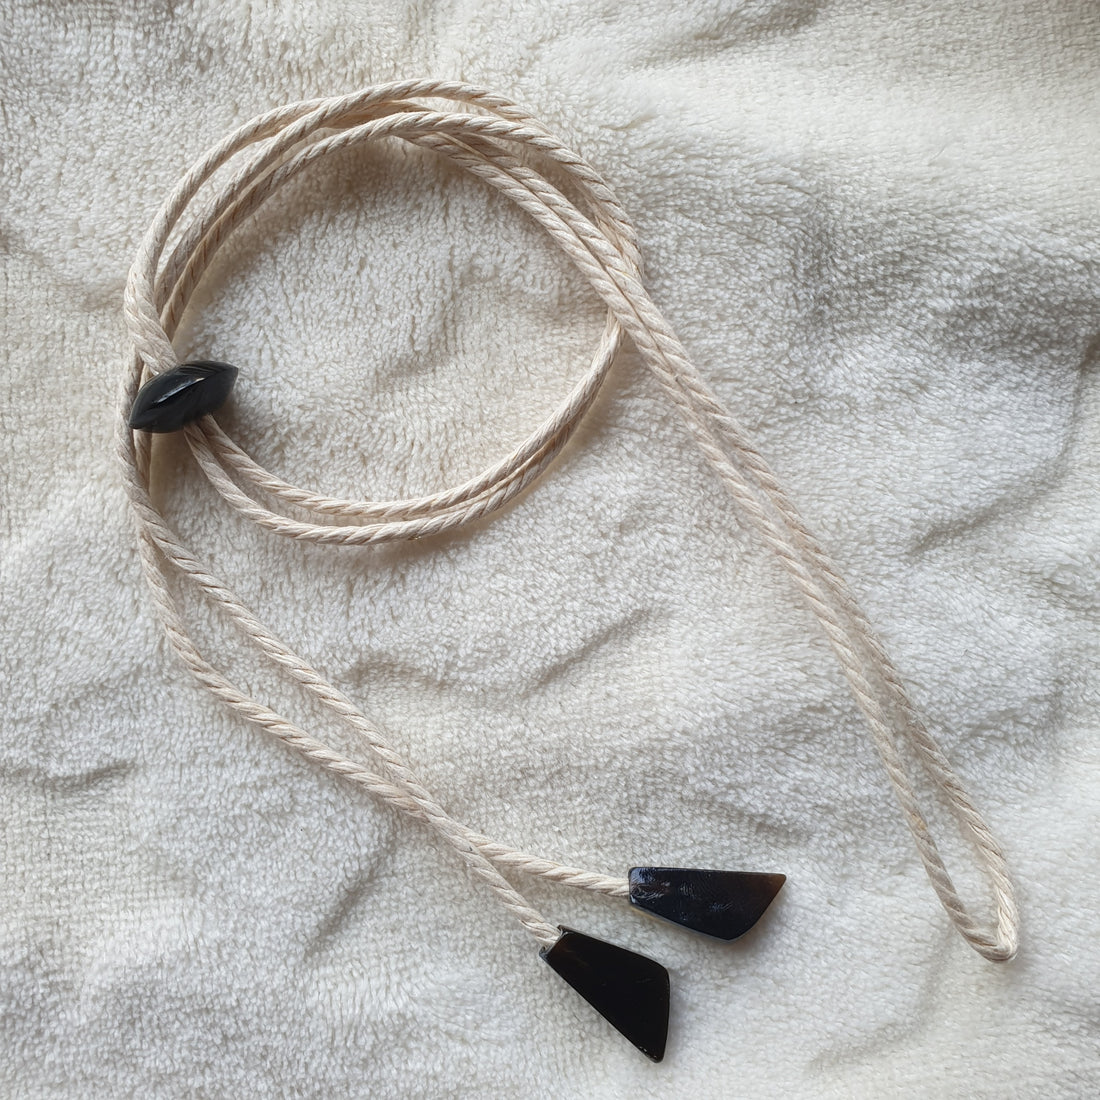 Set of 6 Pendant Cords, J17969. Leather Cord. Cotton Wax Cords. Pendant String. Handmade product from Vietnam